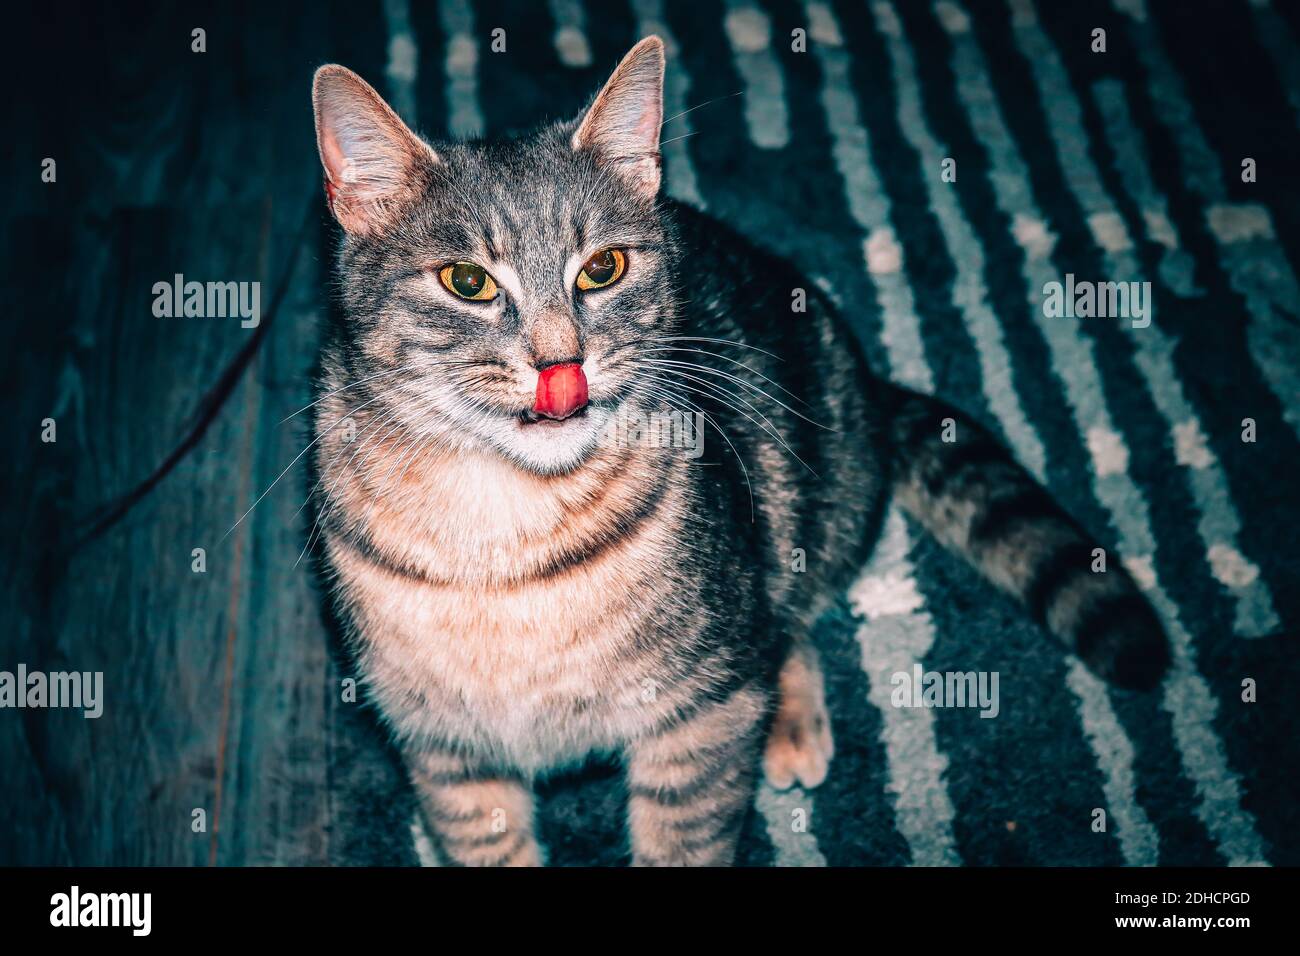 A gray cat with a tongue out Stock Photo